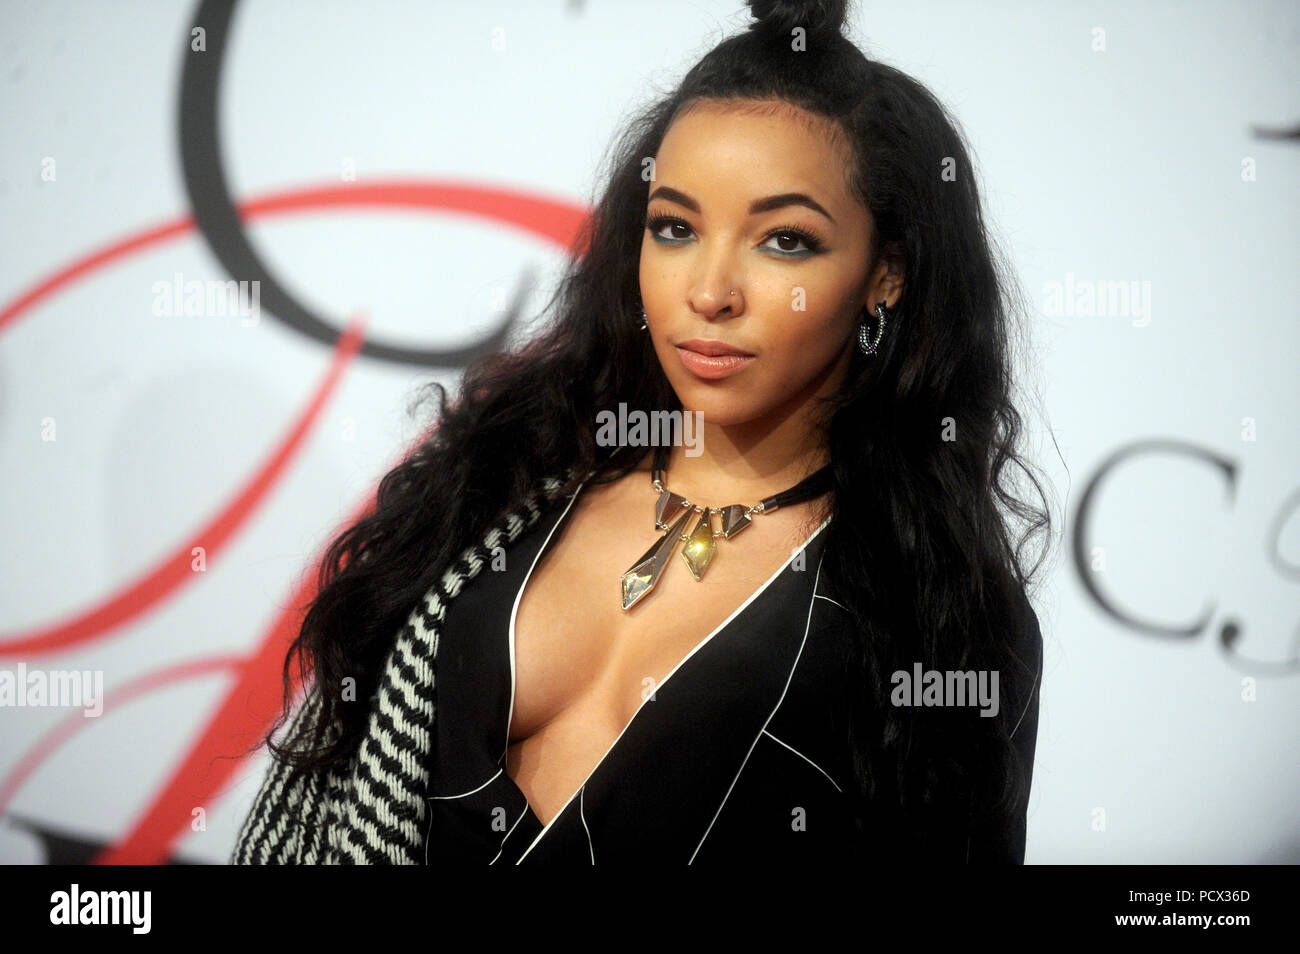 NEW YORK, NY - JUNE 01:  Tinashe attends the 2015 CFDA Fashion Awards at Alice Tully Hall at Lincoln Center on June 1, 2015 in New York City   People:  Tinashe Stock Photo